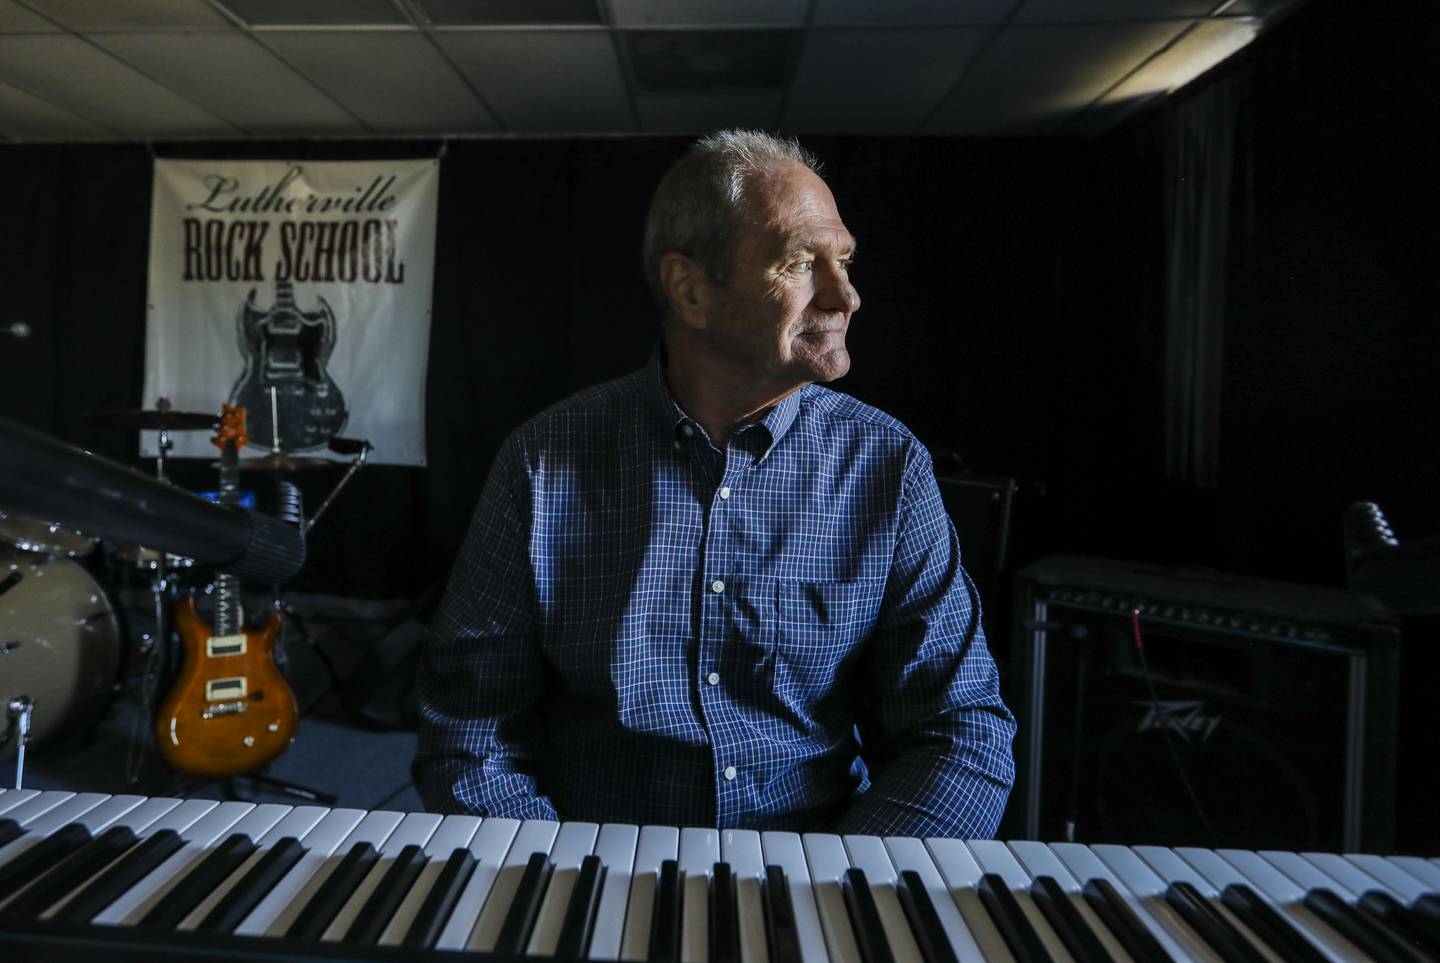 Bruce Anderson, organist for The Capitals for twenty-two years, was recently laid off when they informed him they no longer needed his services. He is pictured here in his Lutherville Music School.